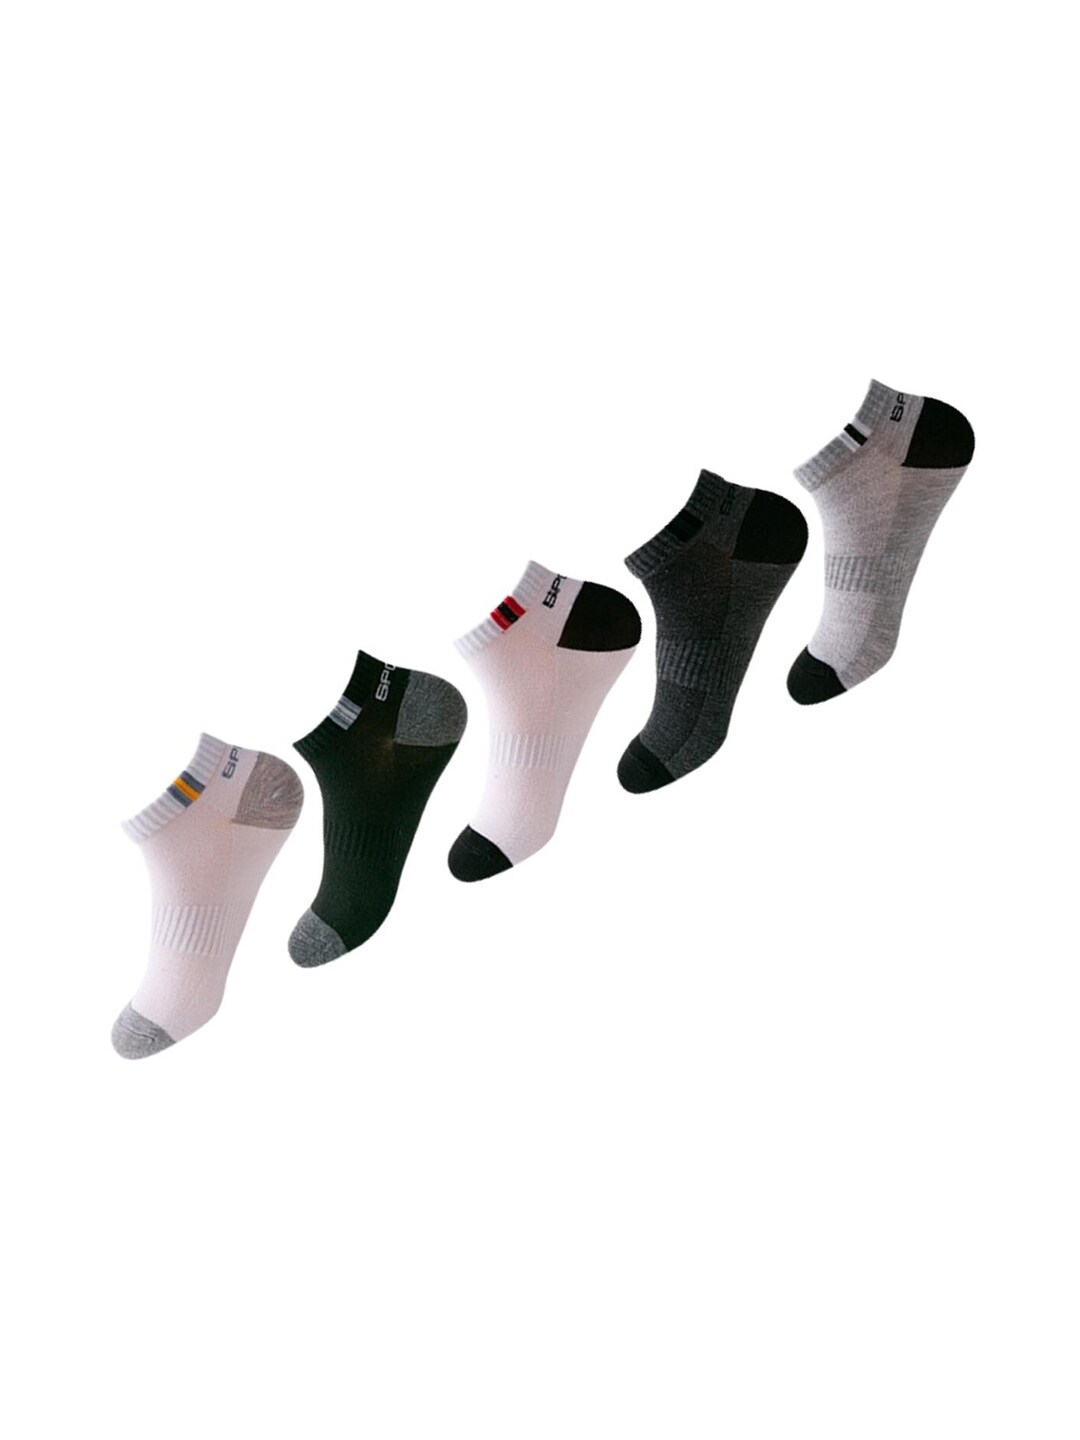 YOUSTYLO Pack of 5 Patterned Ankle Length Socks Price in India